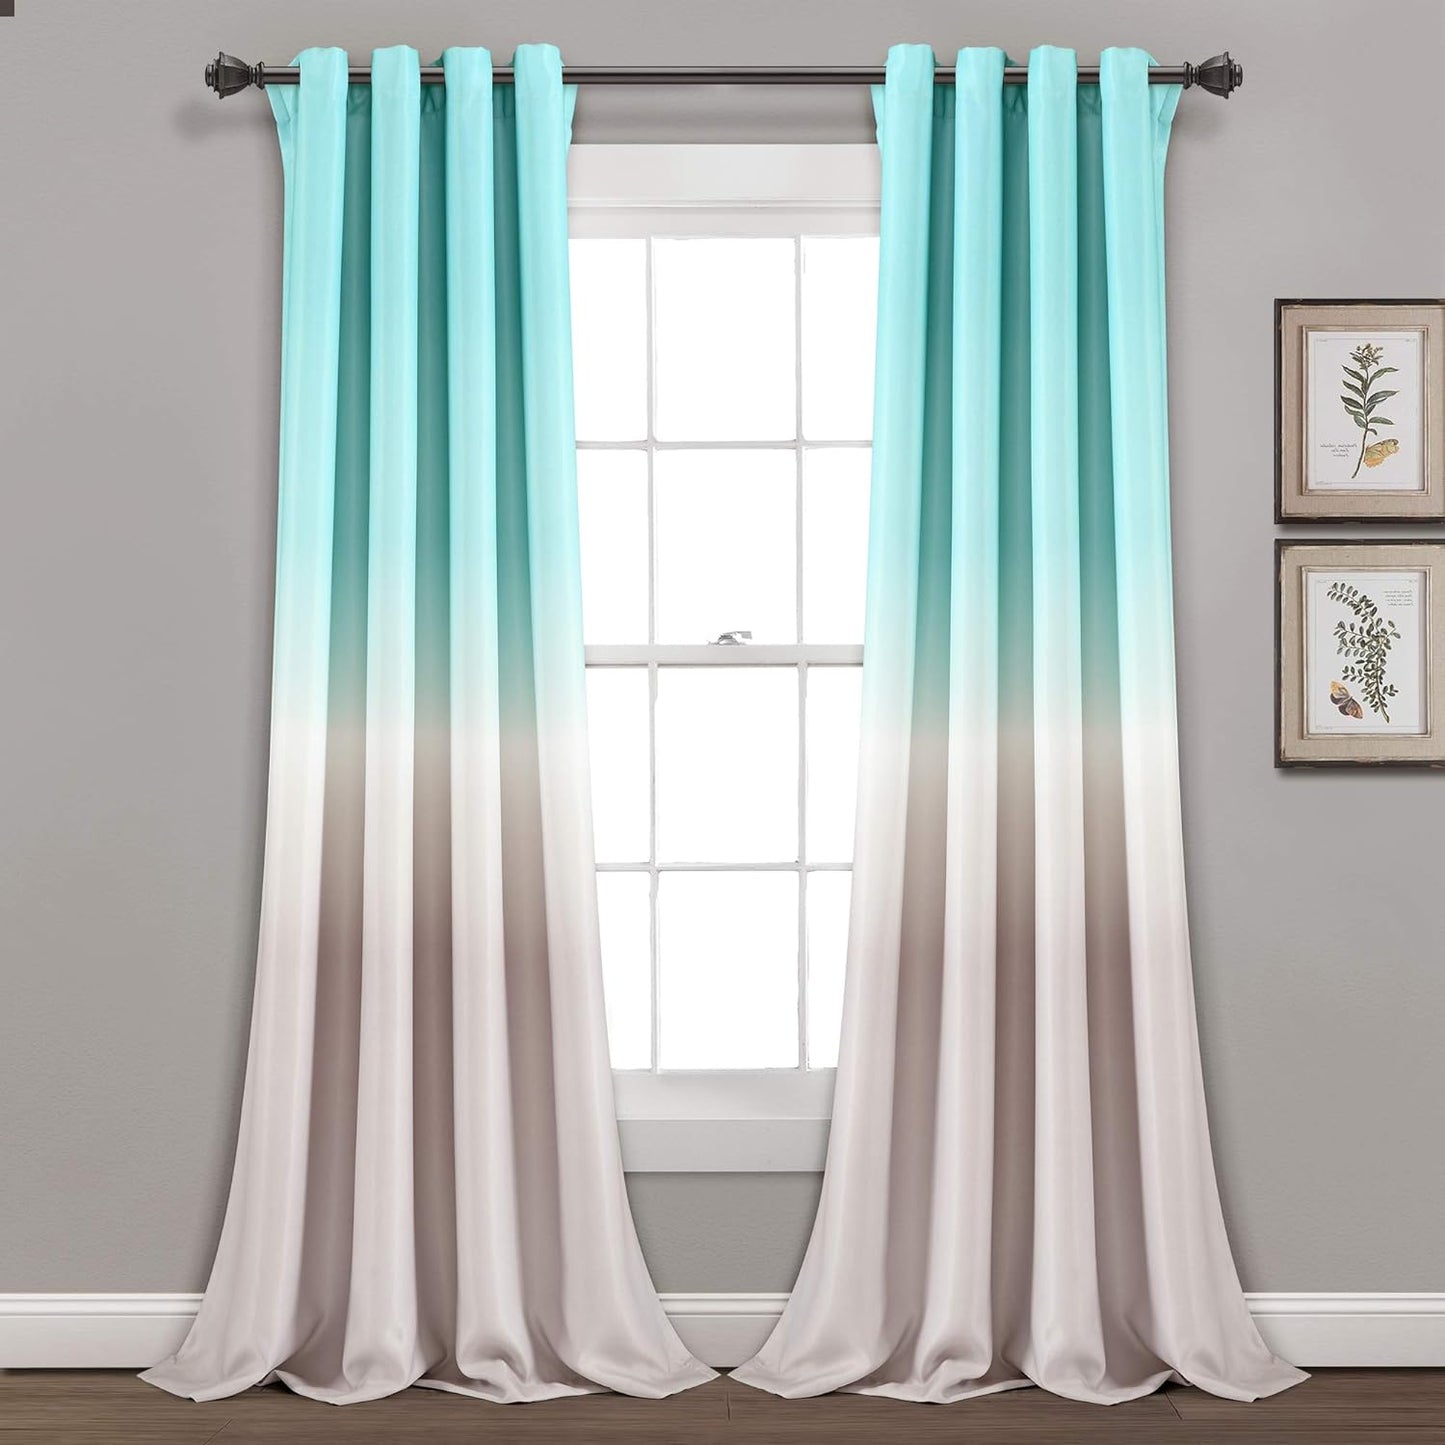 Aqua and Gray Umbre Fiesta Curtains Room Darkening Window Panel Set for Living, Dining, Bedroom (Pair), Long Wide, 52" W X 84" L